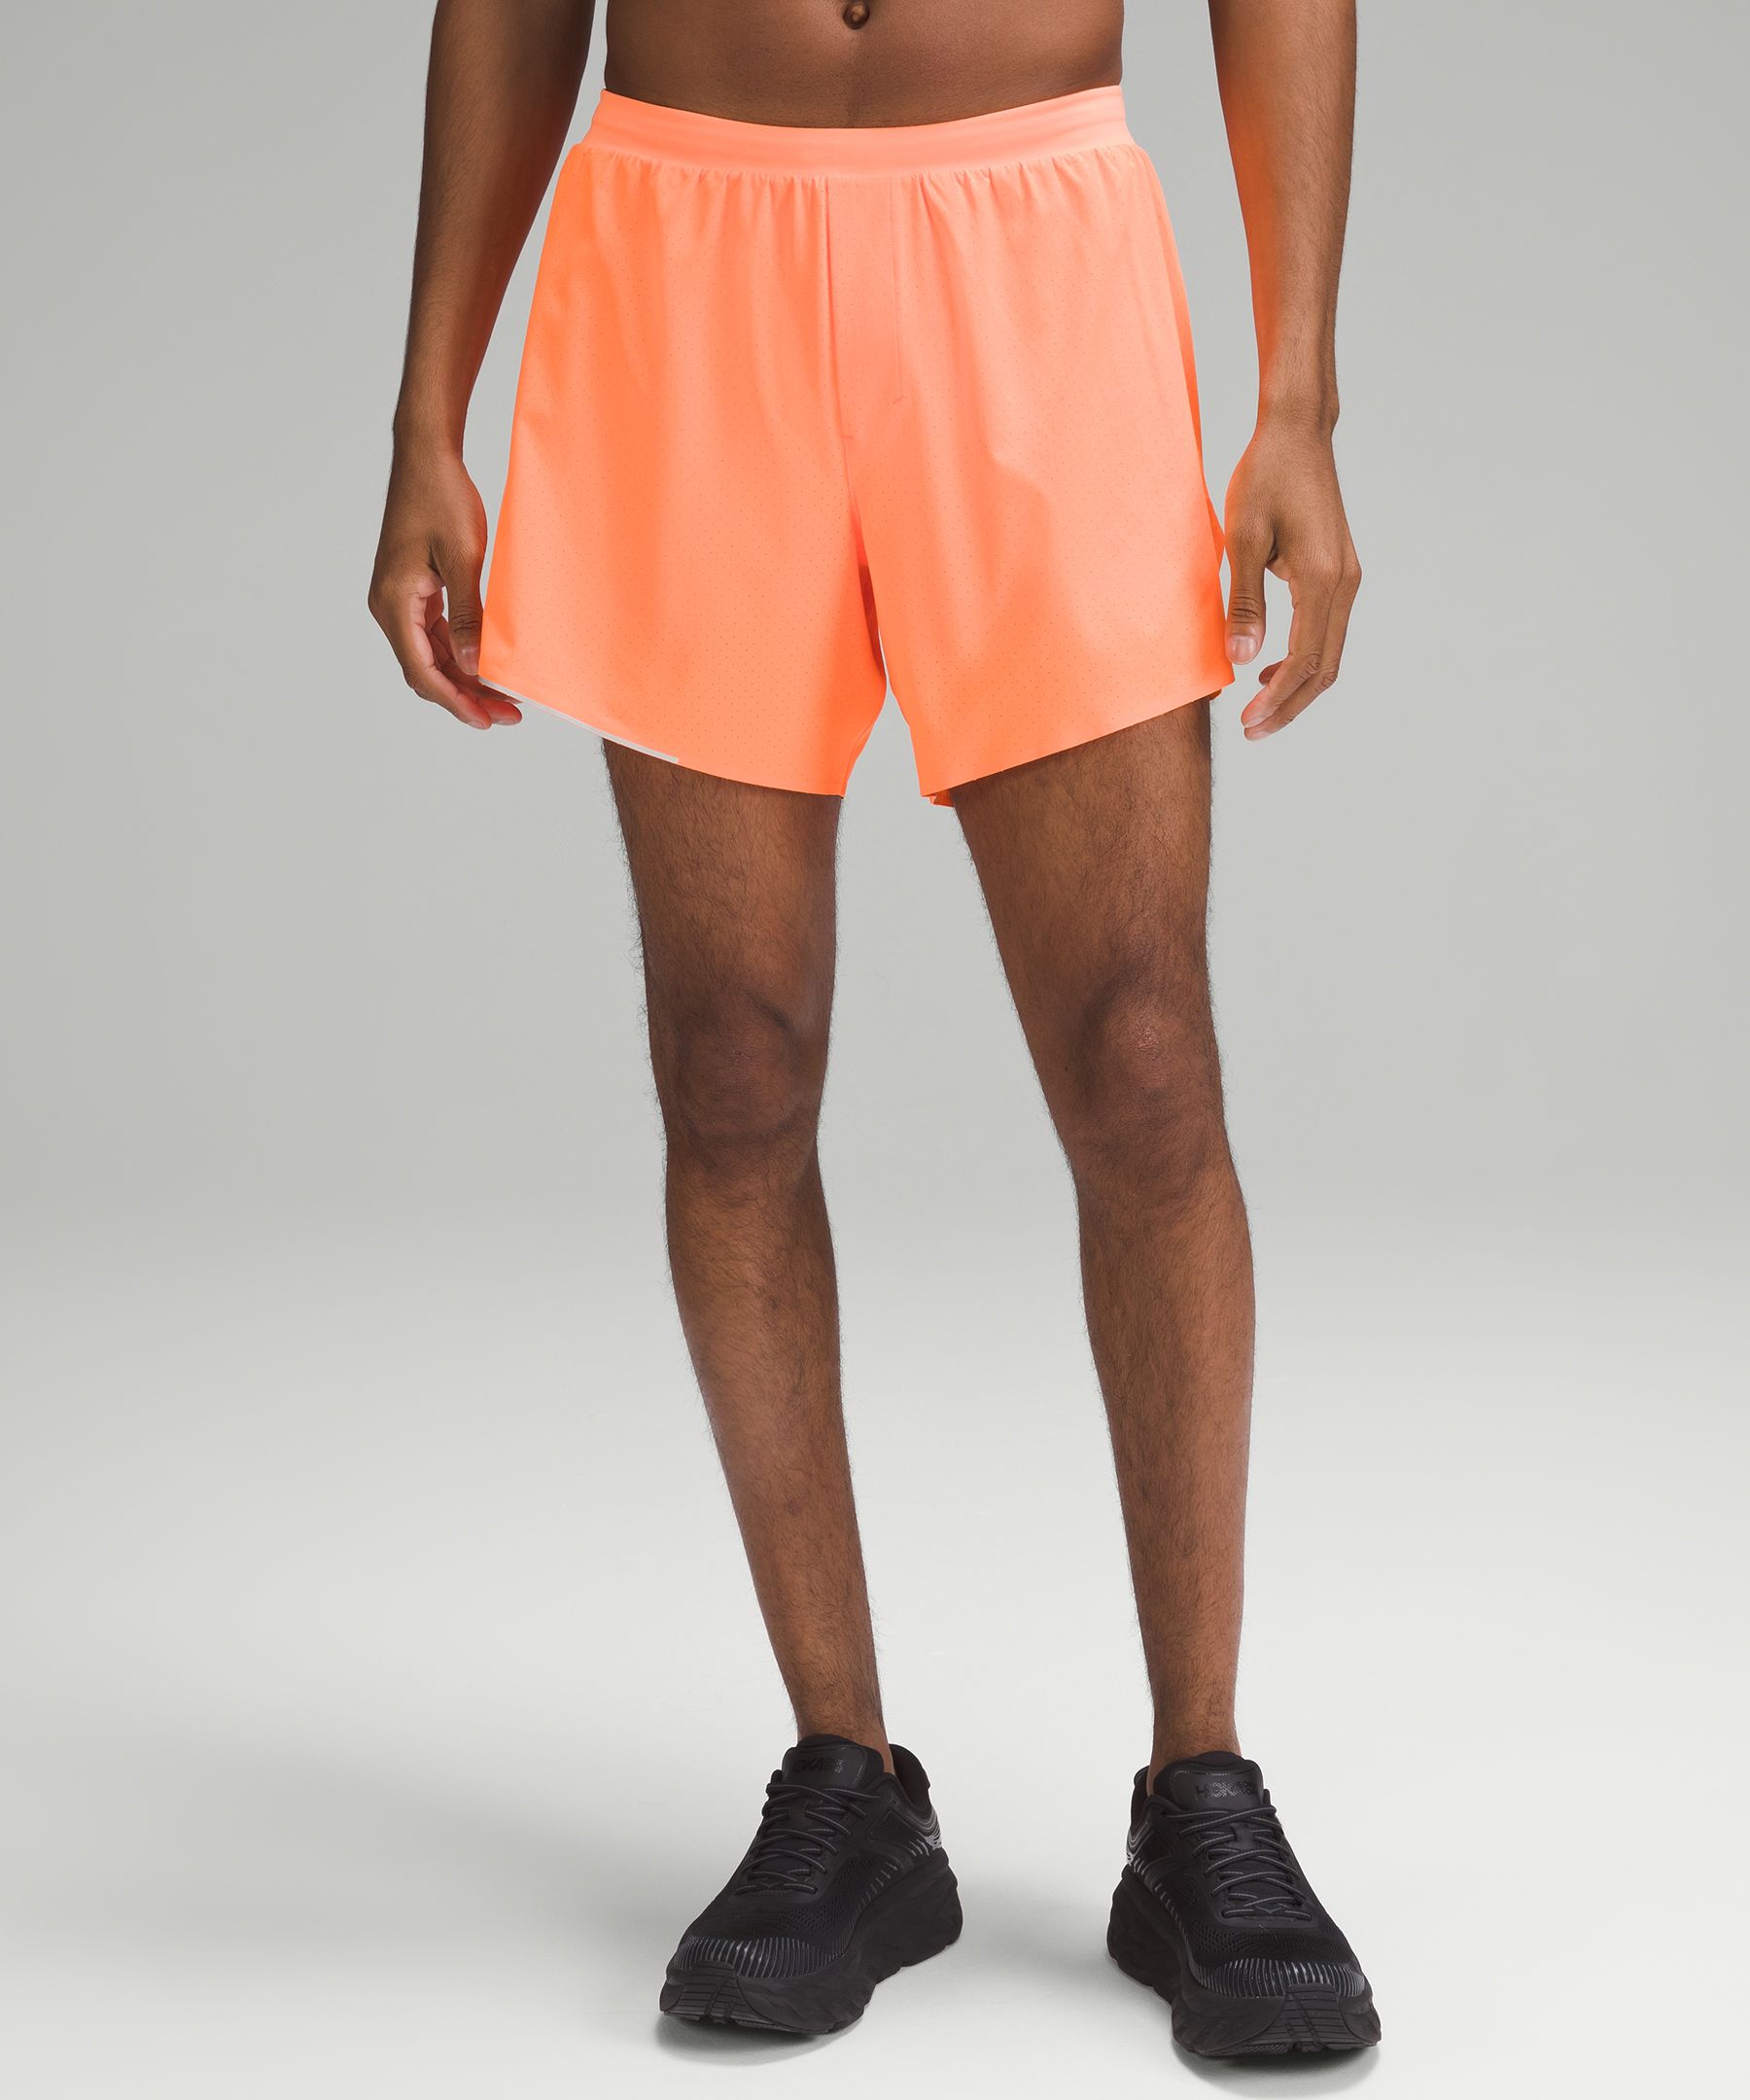 Lululemon Fast And Free Lined Shorts 6" In Highlight Orange